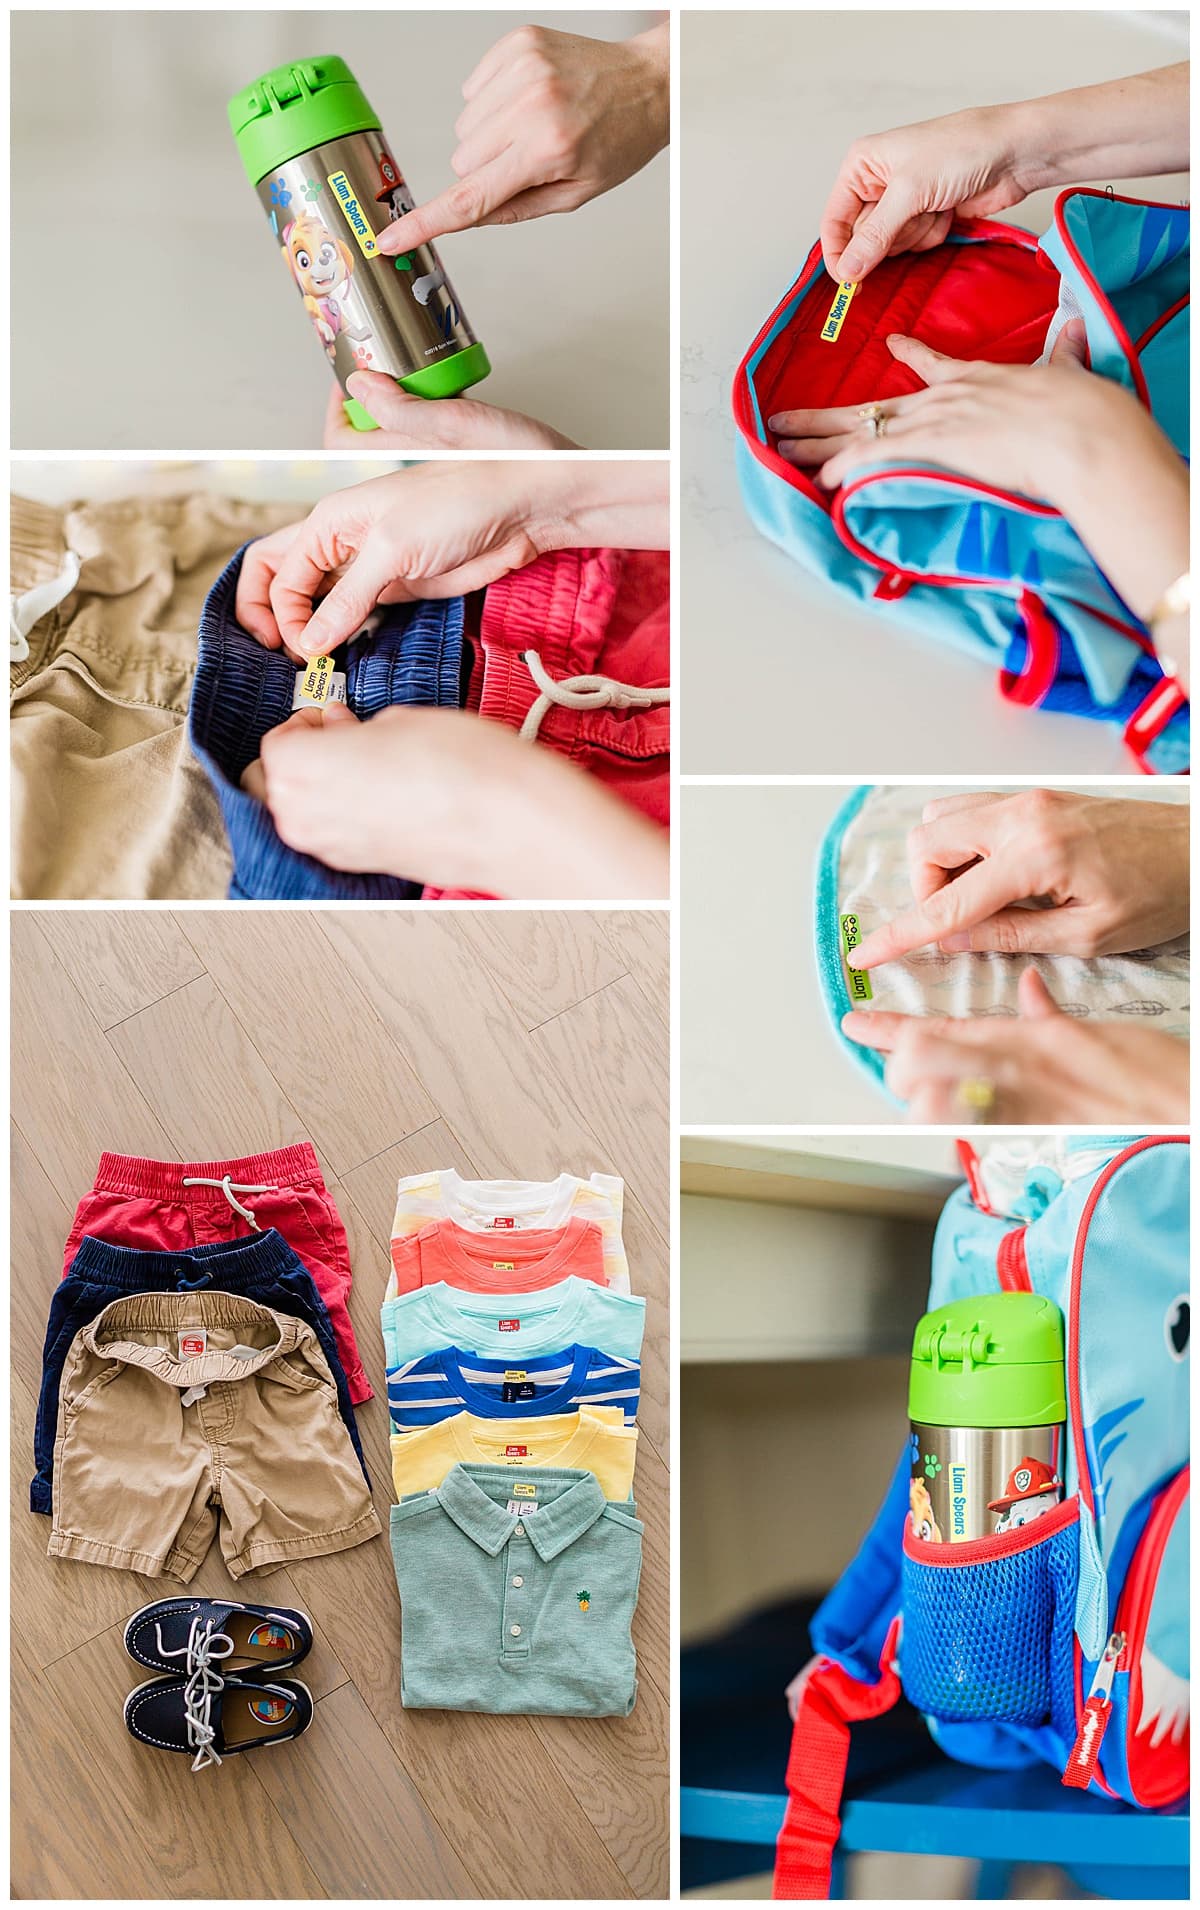 Prevent Germy Mix-Ups & Visits to the Lost & Found with Mabels Labels